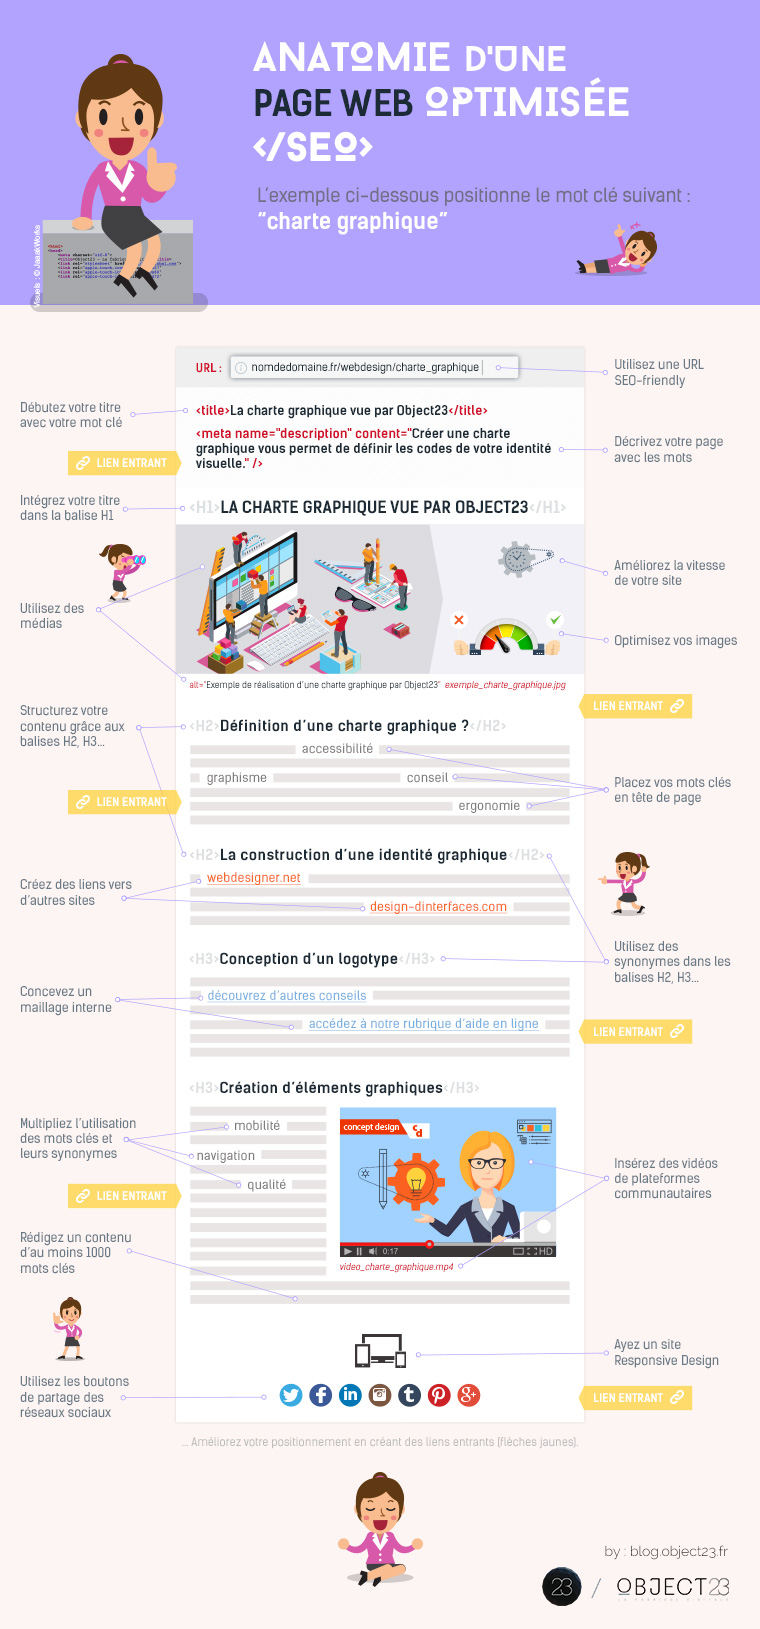 infographie-anatomie-page-web-optimisee